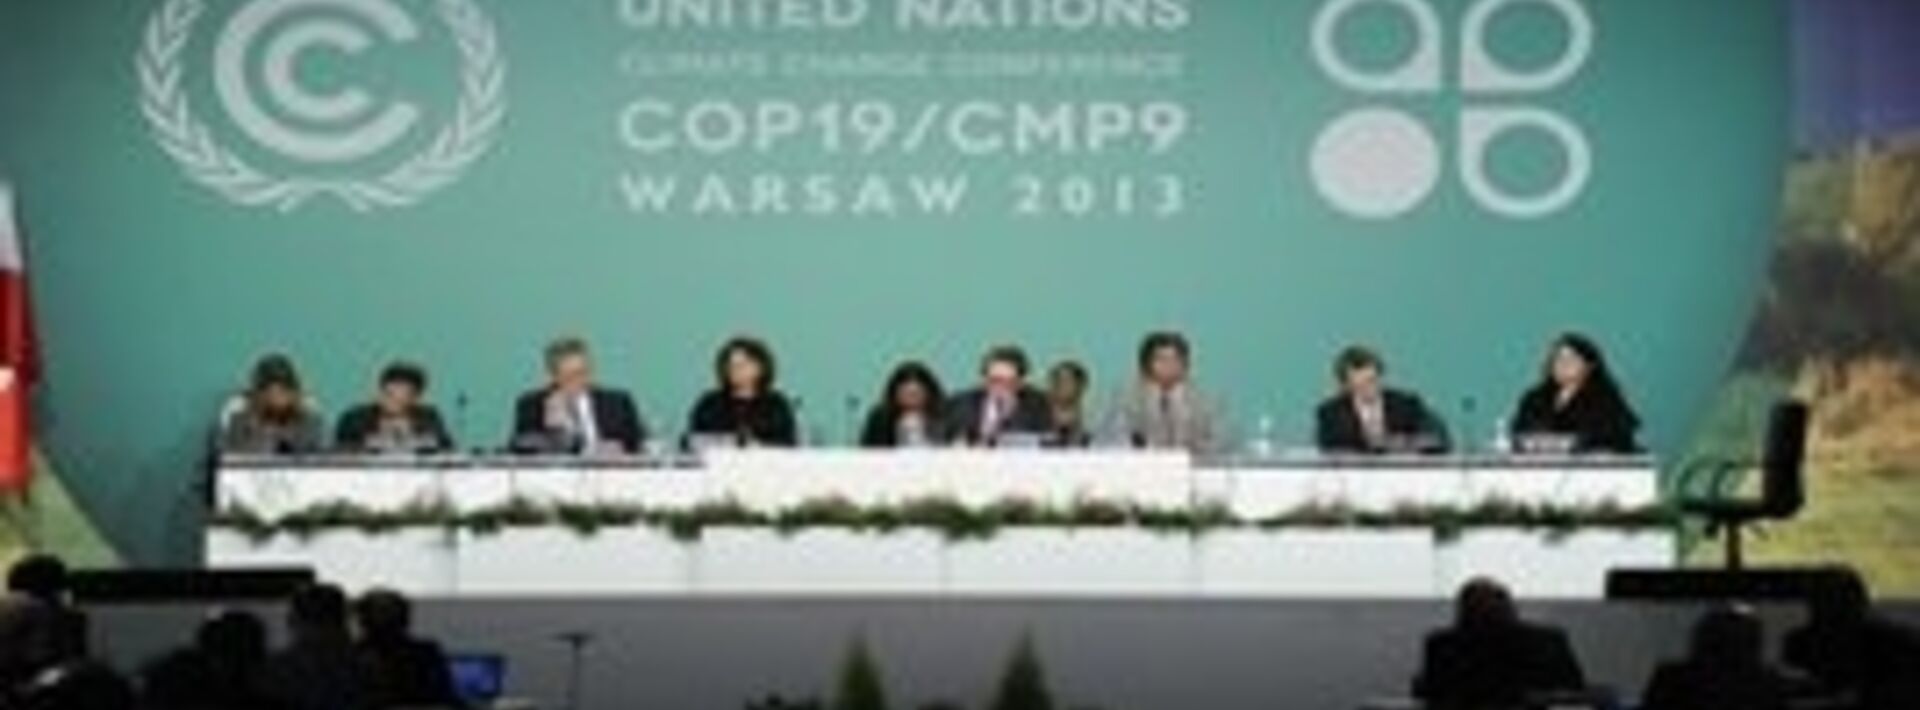 UN agrees on pathway towards 2015 climate change deal